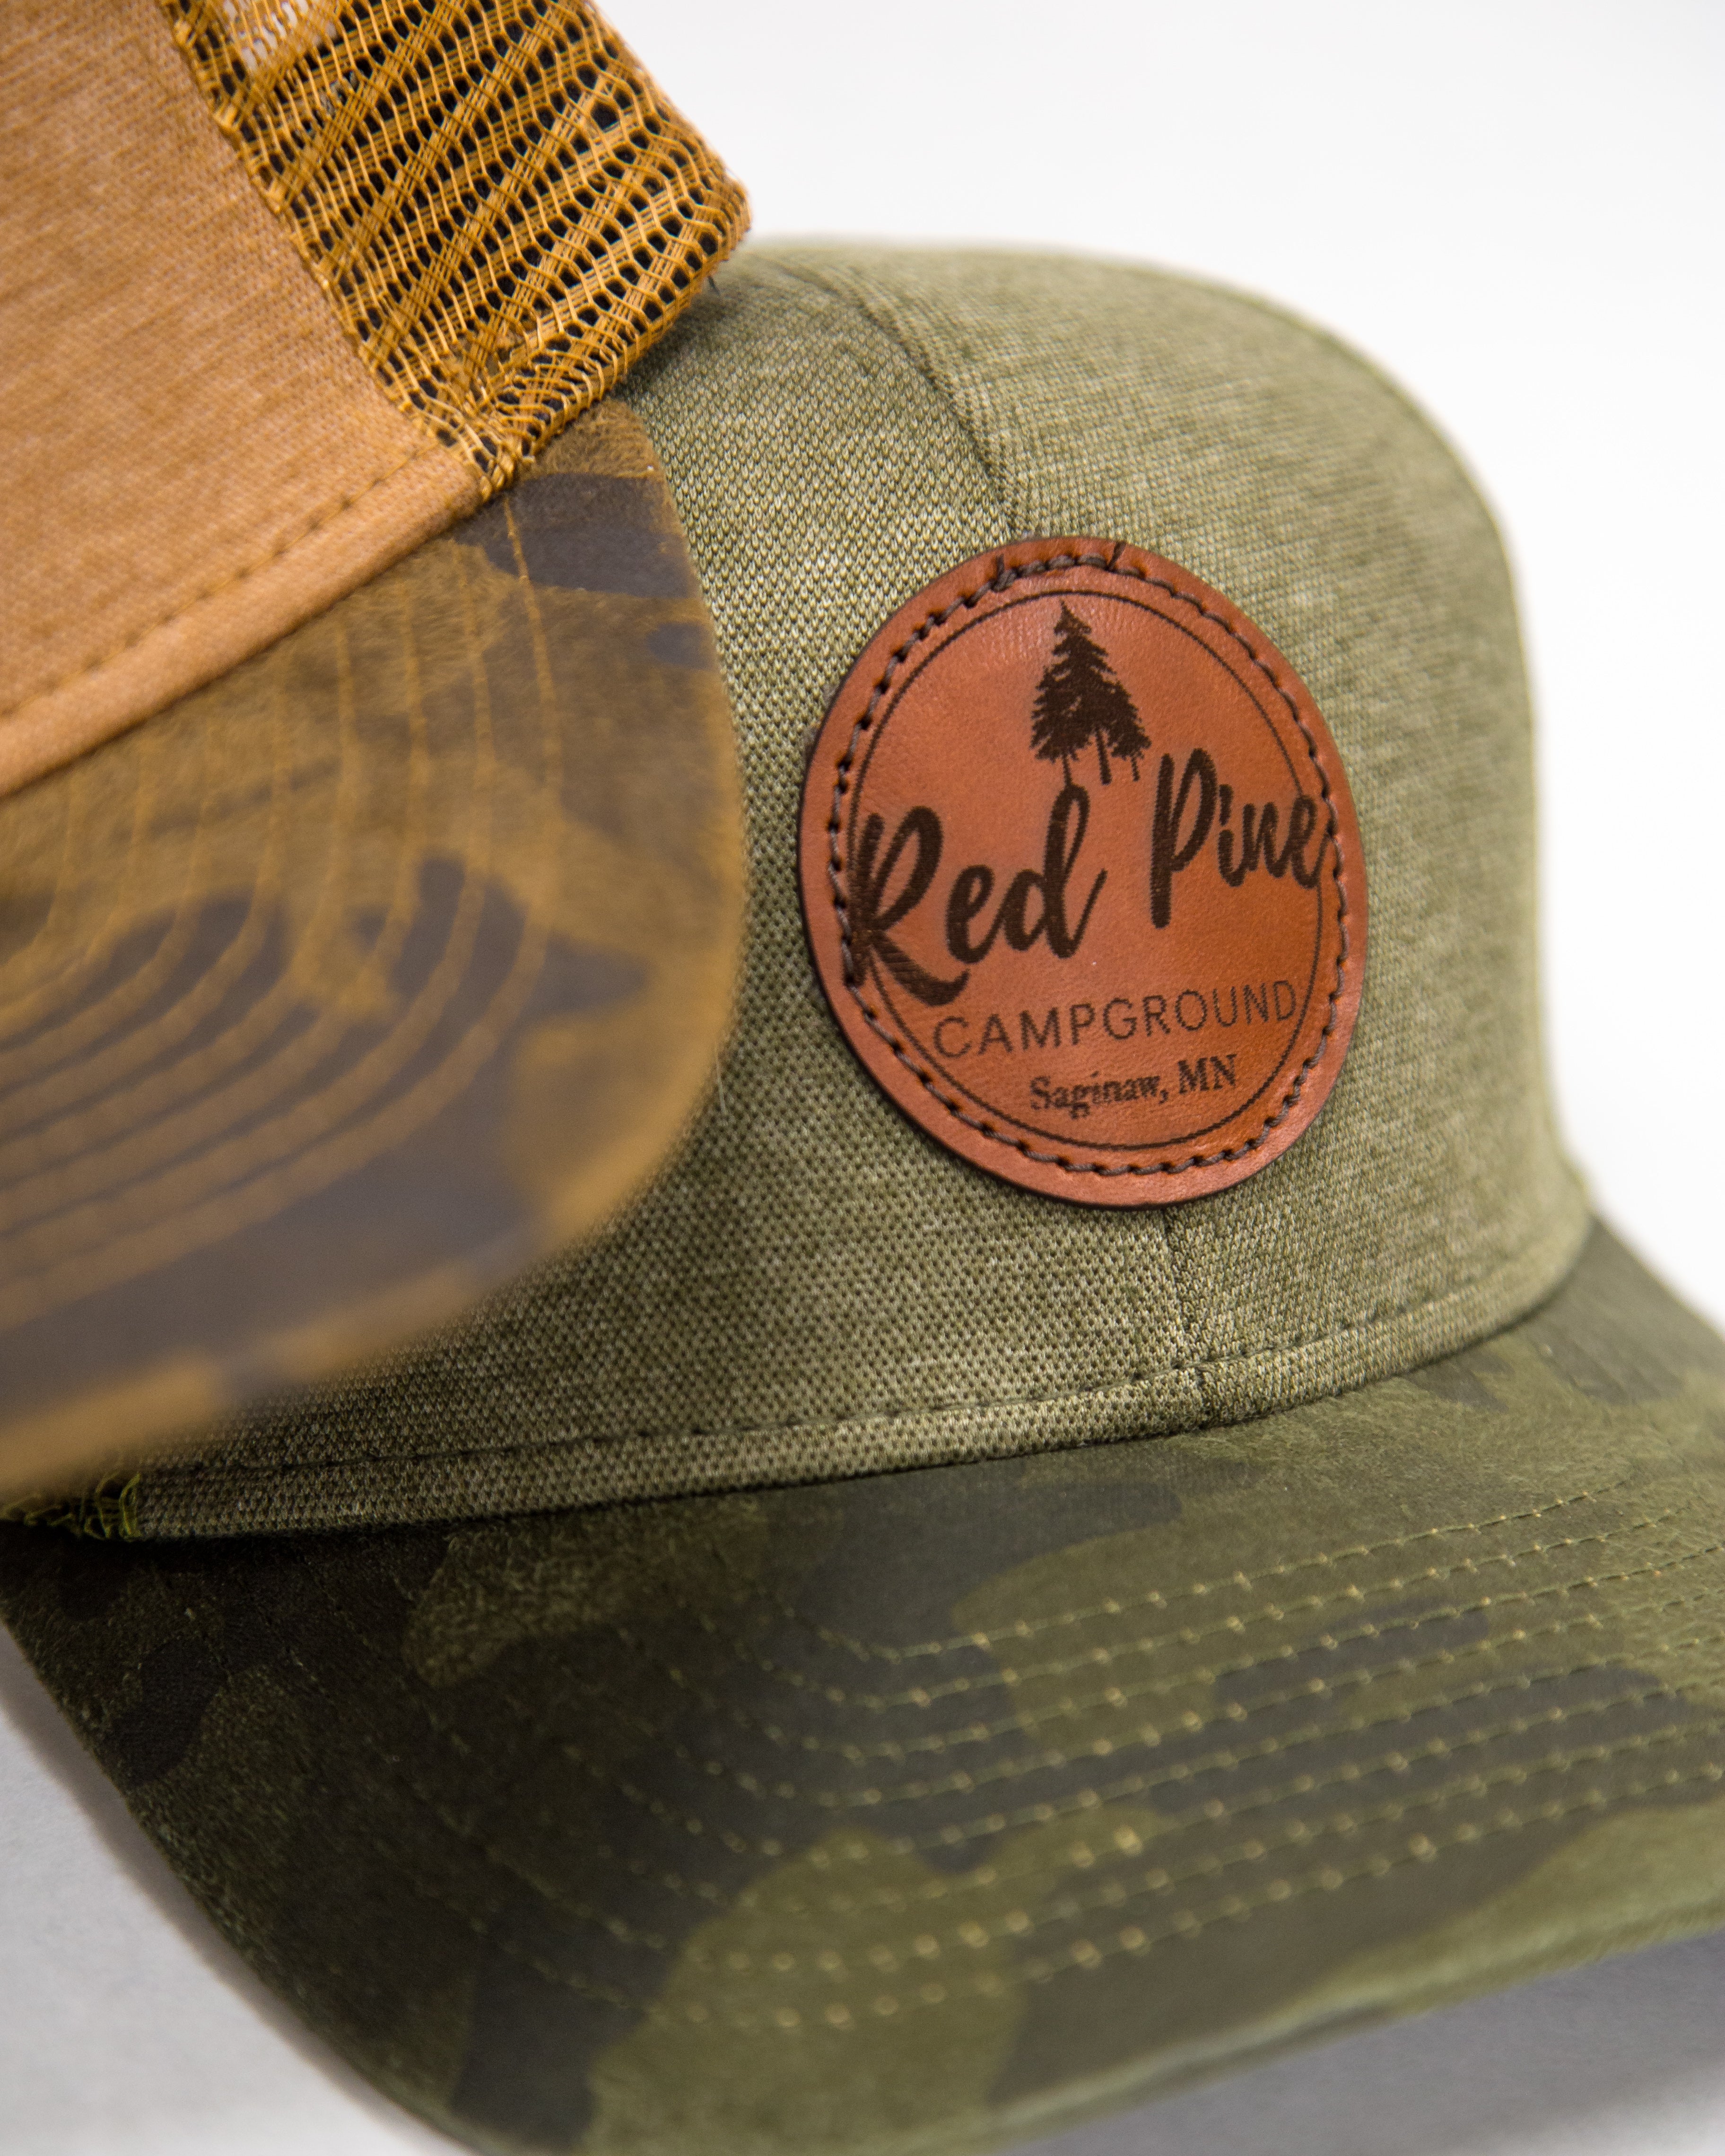 Two camo trucker hats with Red Pine Campground branded leather patches on the front.